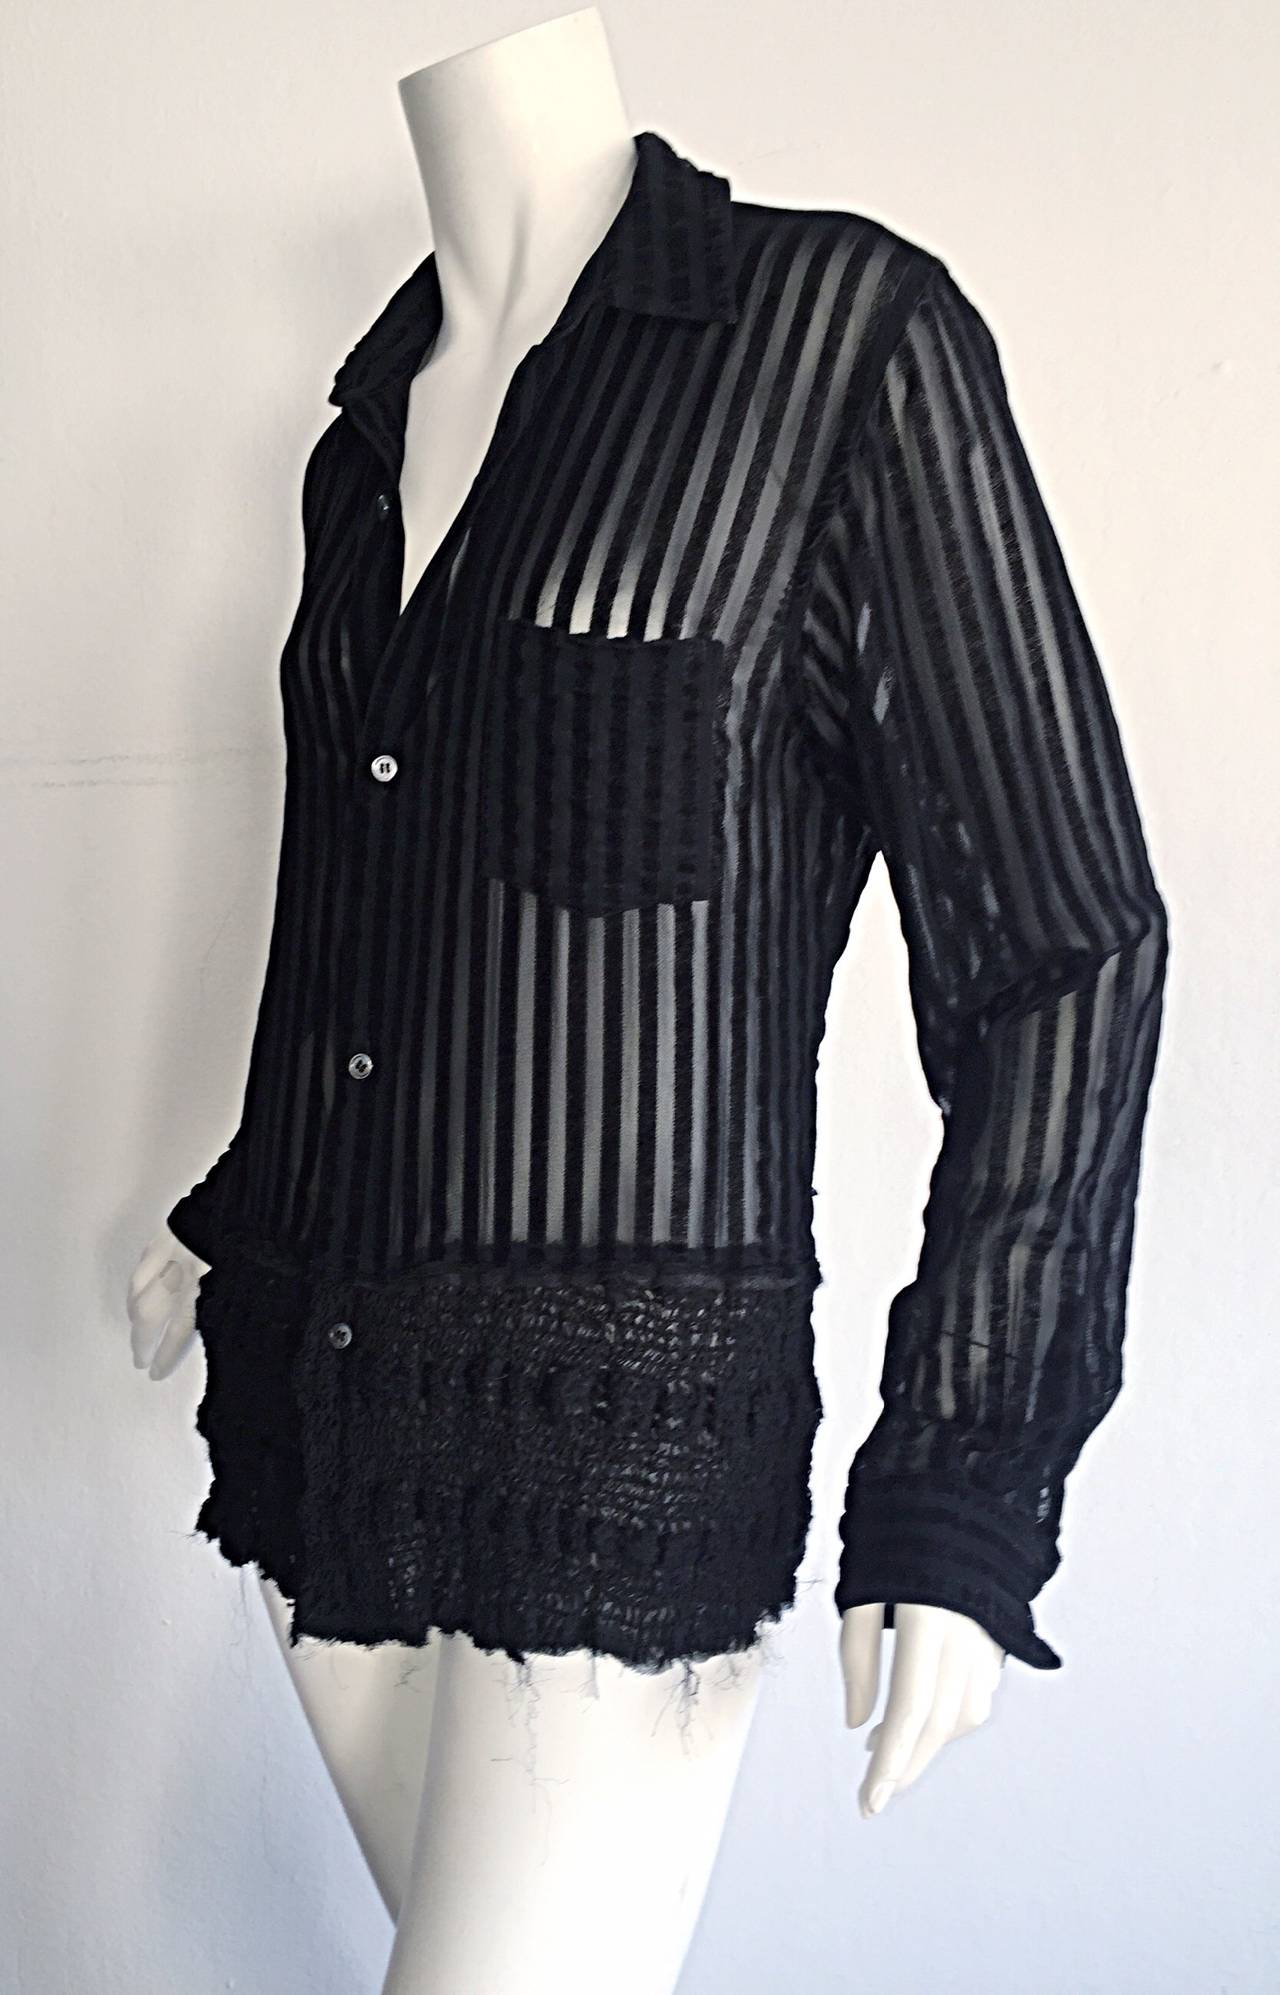 1990s Vintage Comme des Garçons Black Sheer Striped Sheared 90s Shirt In Excellent Condition For Sale In San Diego, CA